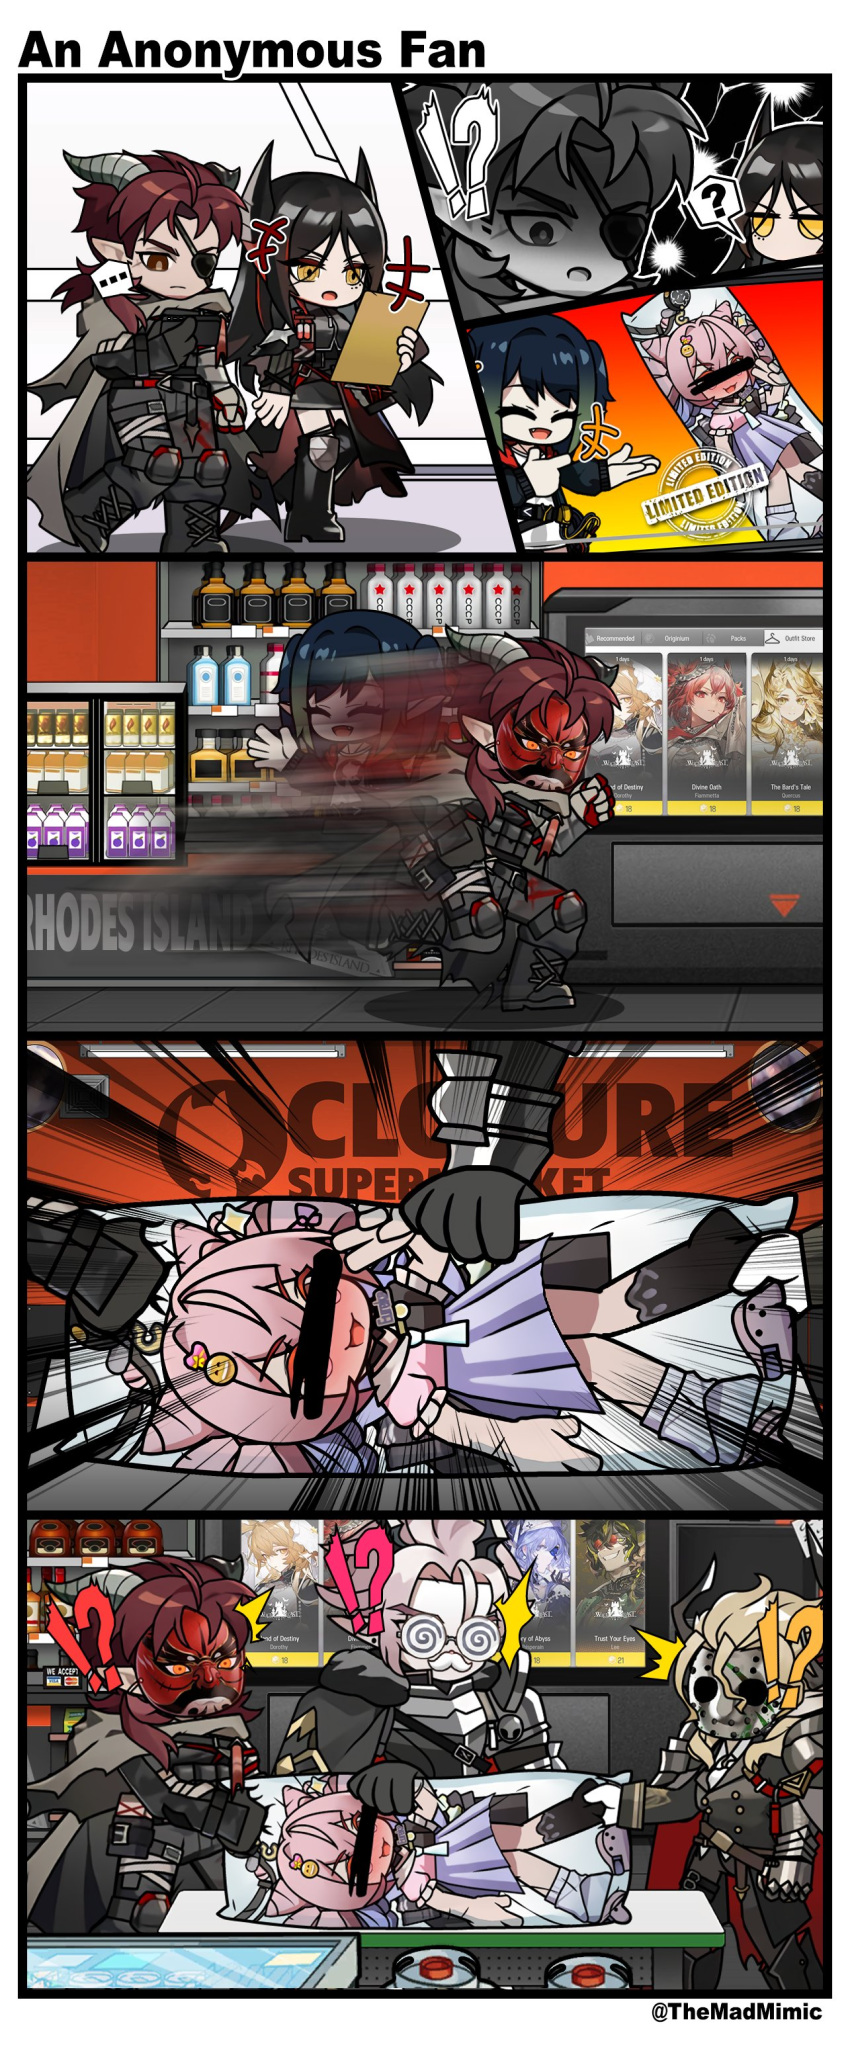 2girls 3boys absurdres arknights bar_censor censored closure_(arknights) coke-bottle_glasses dakimakura_(object) demon_boy demon_horns dorothy_(arknights) dorothy_(hand_of_destiny)_(arknights) eyepatch fake_facial_hair fake_mustache fiammetta_(arknights) fiammetta_(divine_oath)_(arknights) glasses highres hockey_mask hoederer_(arknights) horns identity_censor ines_(arknights) kabuki lee_(arknights) lee_(trust_your_eyes)_(arknights) manfred_(arknights) mask multiple_boys multiple_girls pillow quercus_(arknights) quercus_(the_bard's_tale)_(arknights) shop surprised the_mad_mimic theresis_(arknights) u-official_(arknights) vampire whisperain_(arknights) whisperain_(priory_of_abyss)_(arknights)